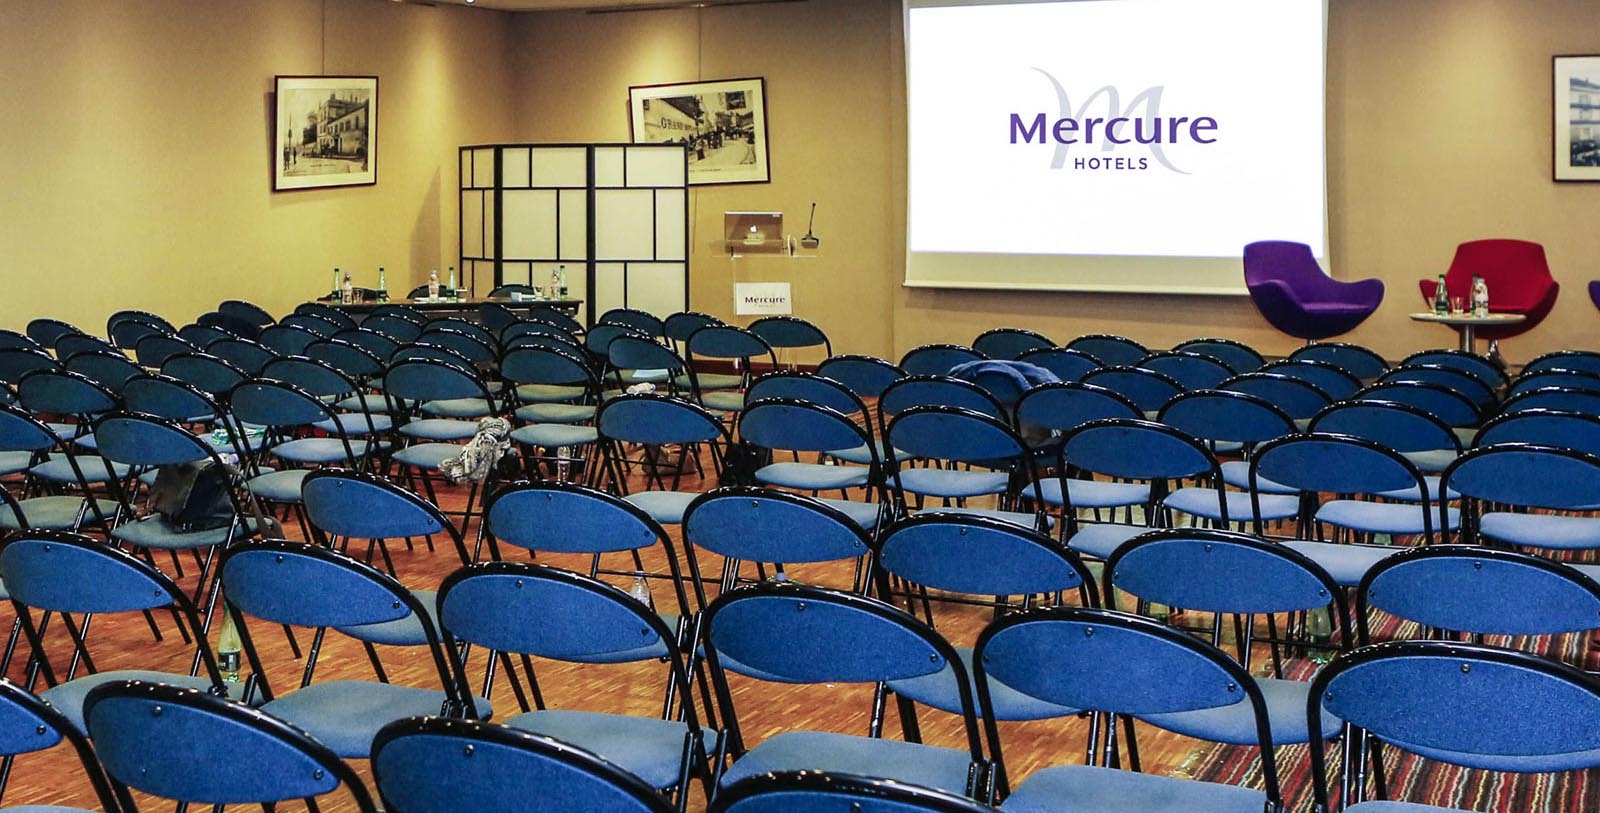 Image of Meeting Room, Mercure Angouleme Hotel de France, established 1600, member of Historic Hotels Worldwide 2019, France, Europe, Request For Proposal